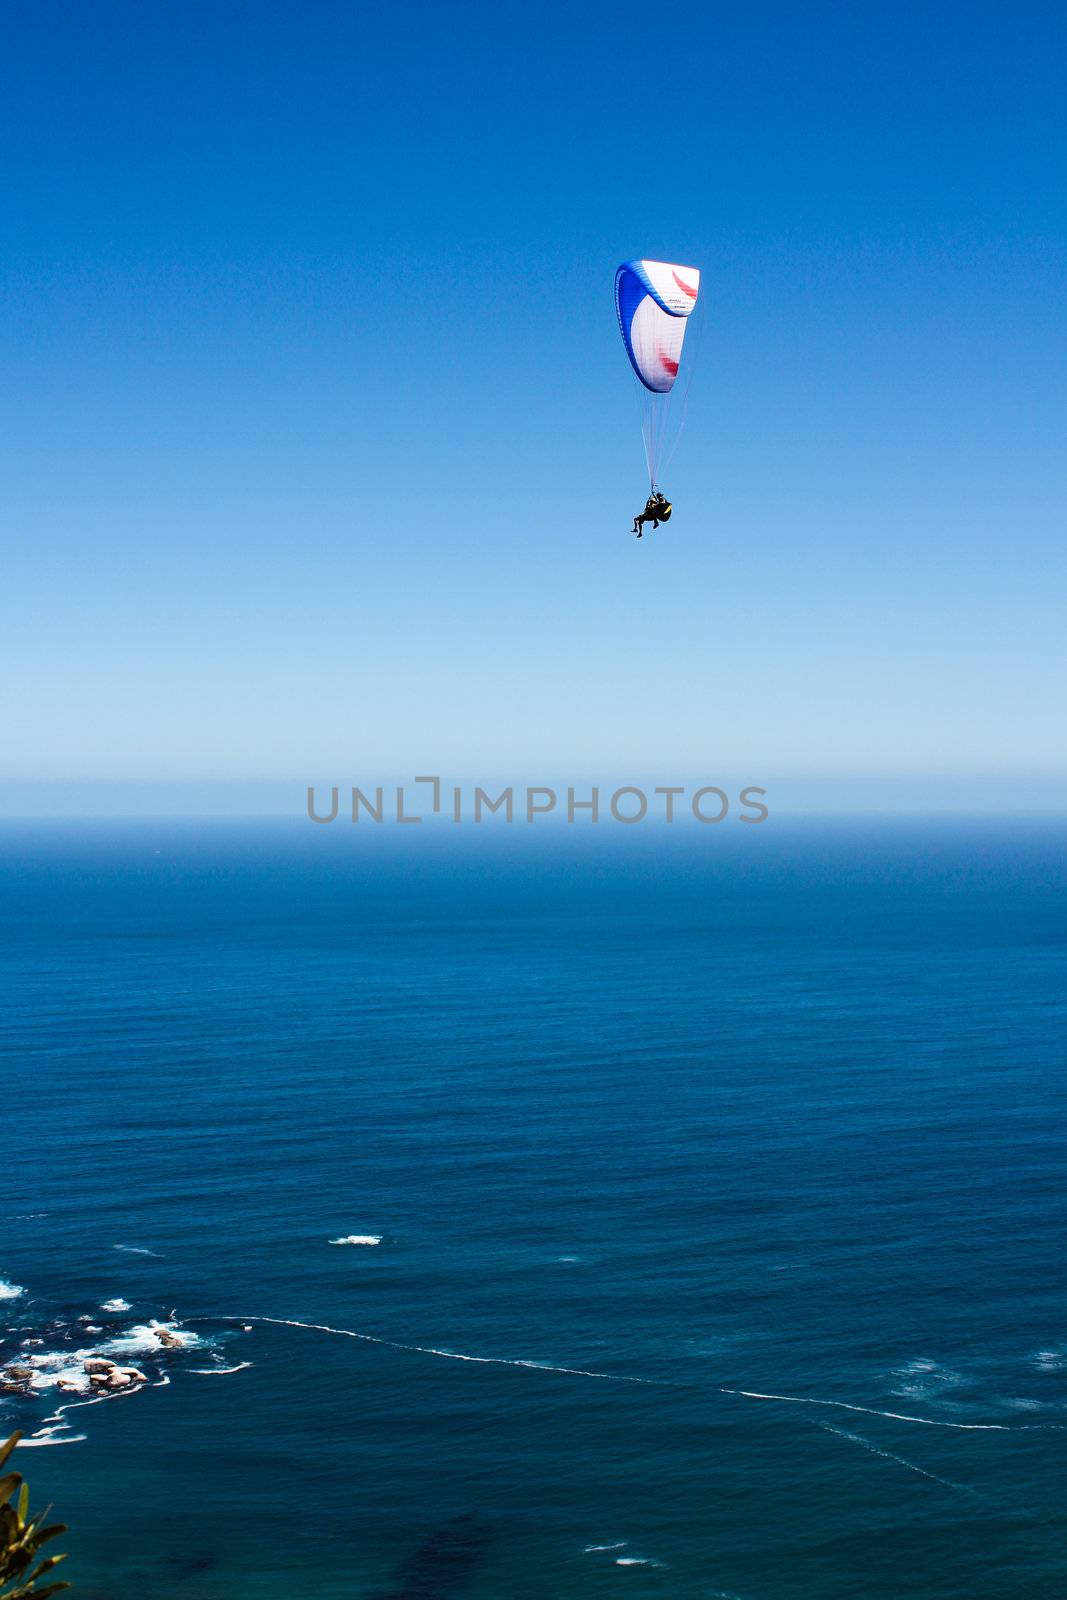 Paraglider flying in front of blue sky and blue water by dwaschnig_photo